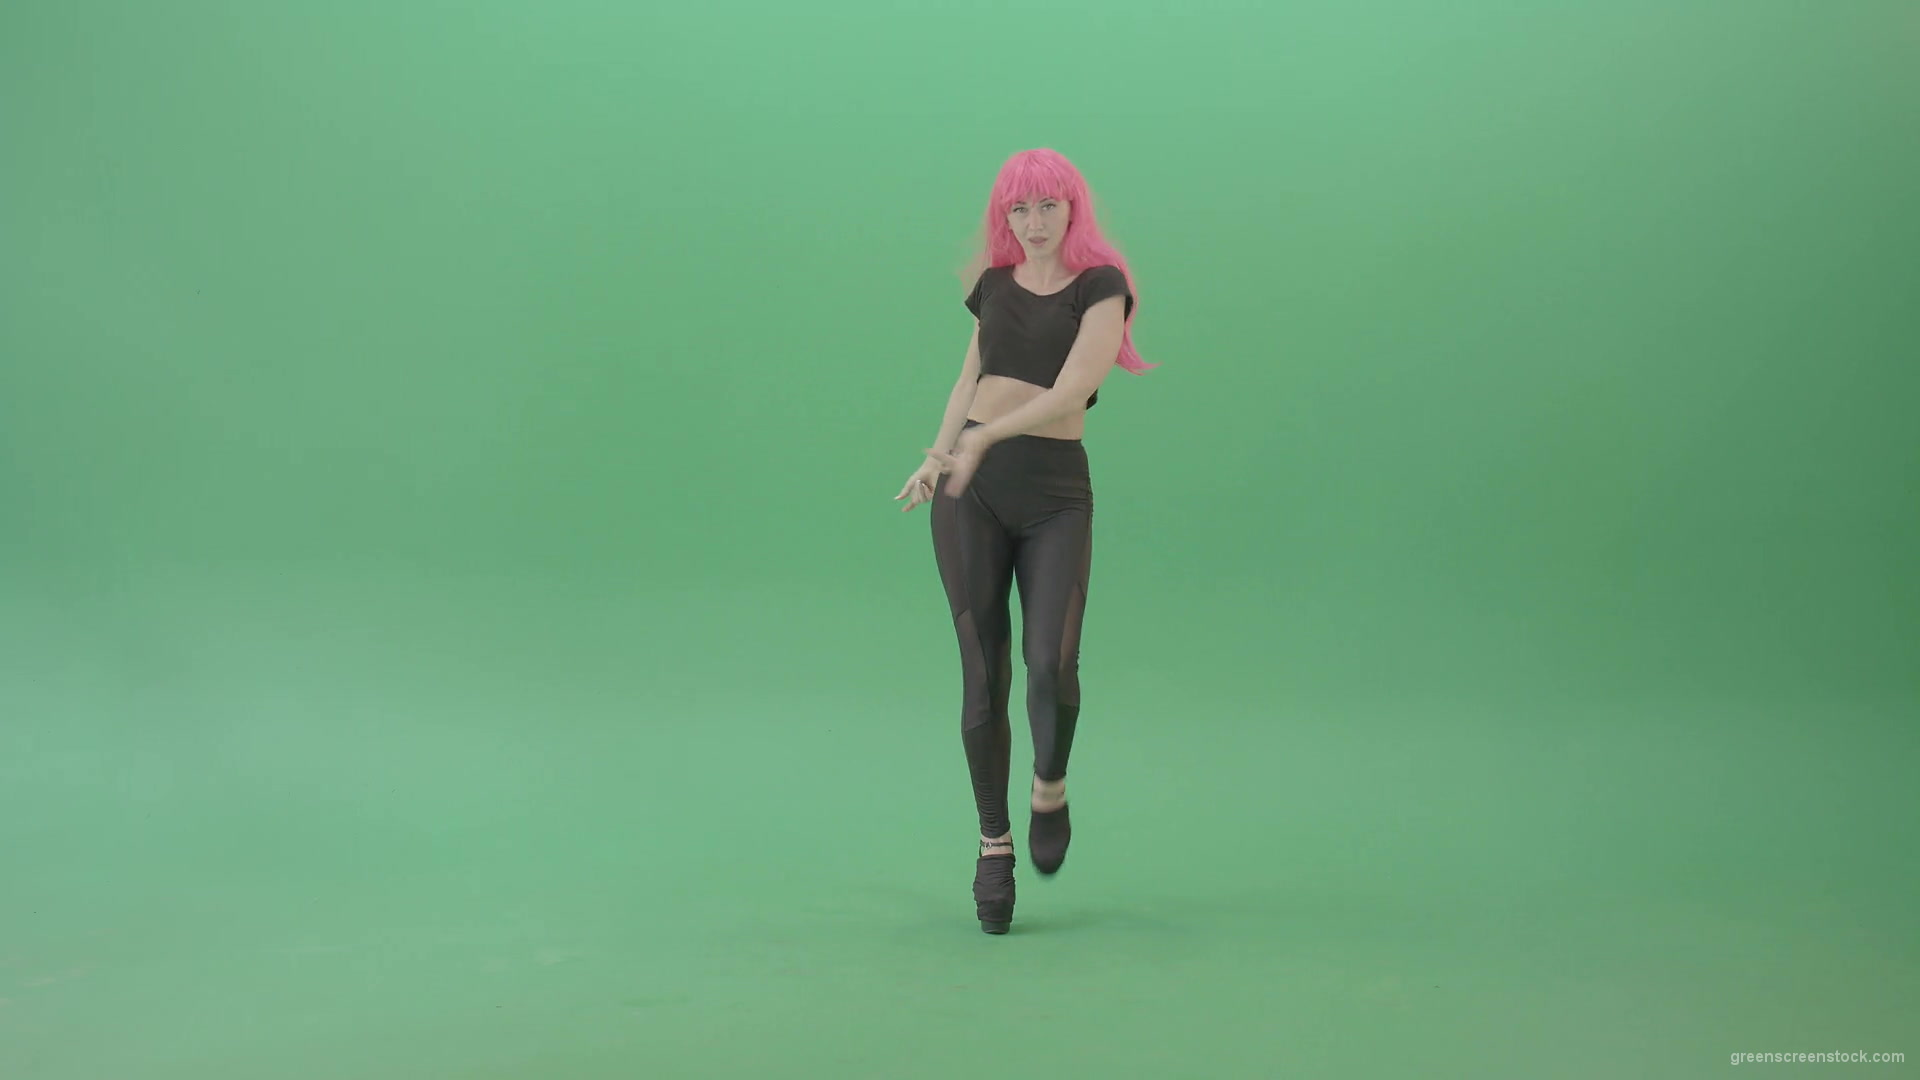 Pink-hair-EMO-sexy-girl-on-green-screen-posing-and-dancing-4K-Video-Footage-1920_006 Green Screen Stock